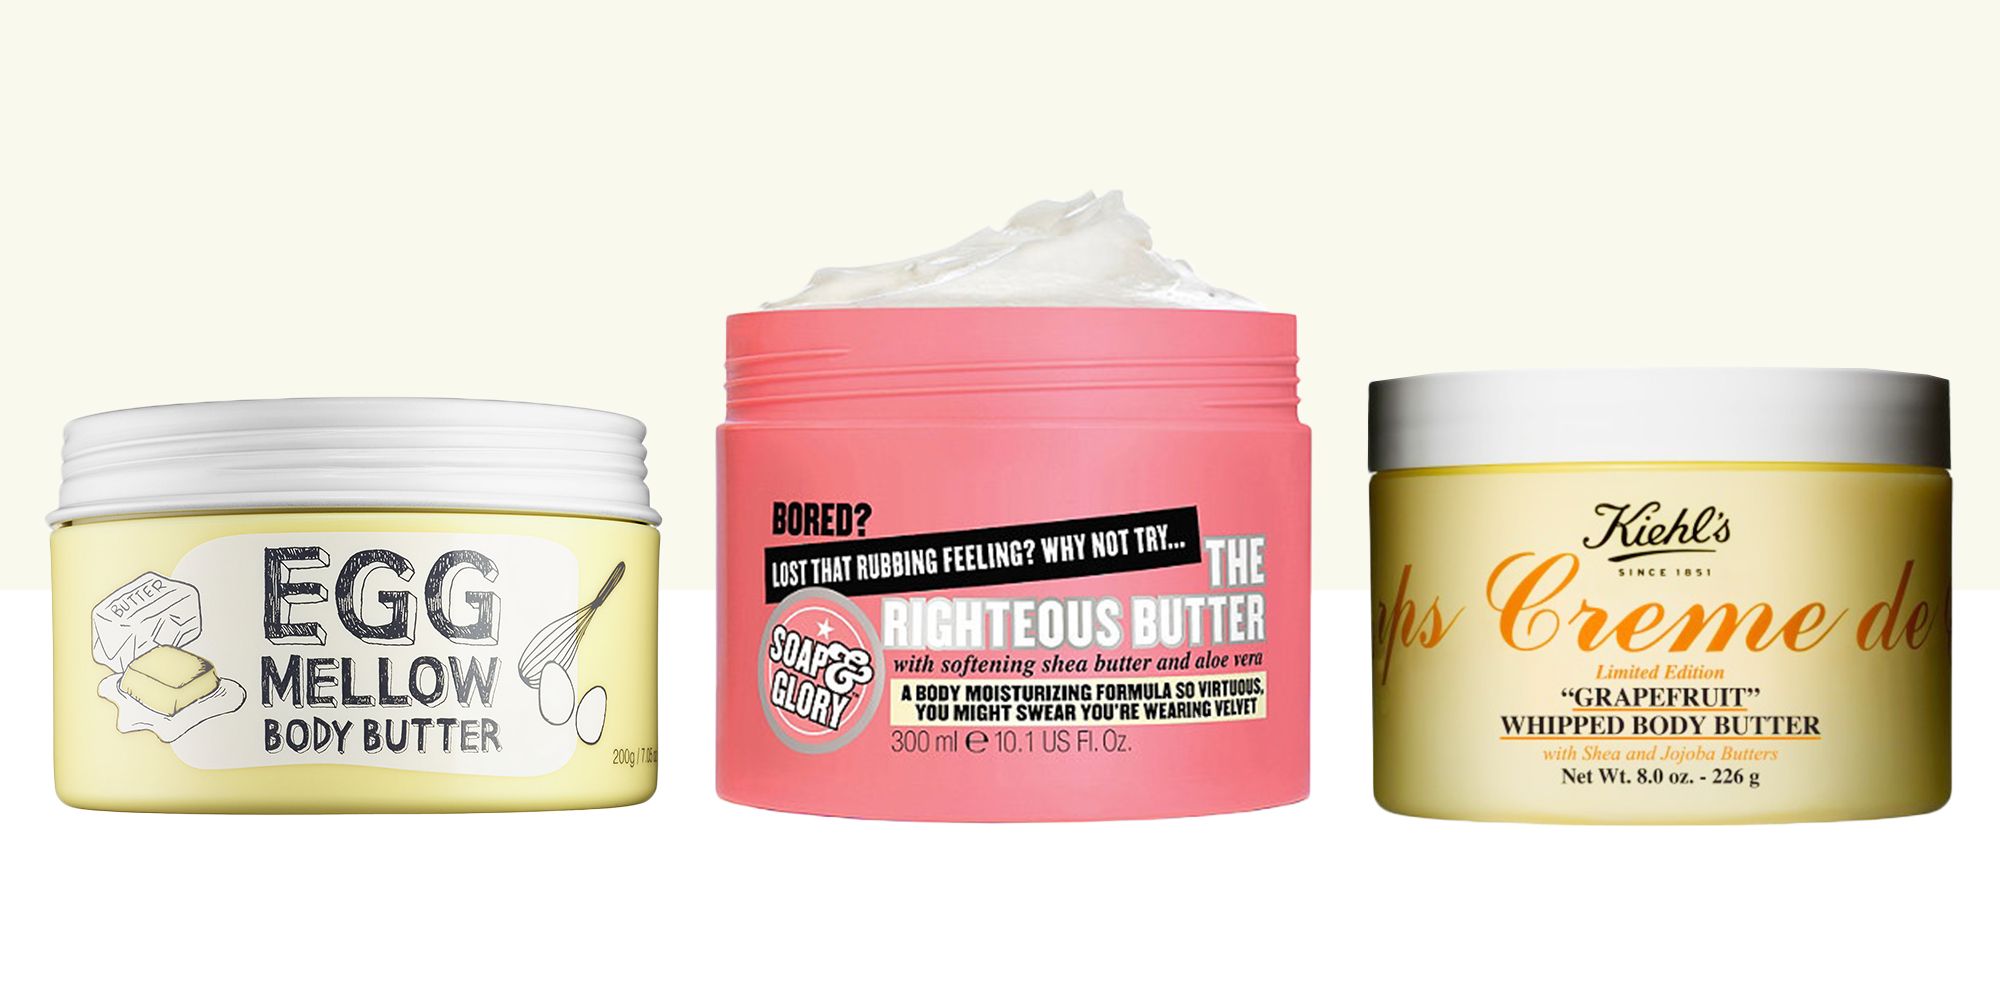 Architectuur Ronde interferentie 11 Best Body Butters in 2018 - Hydrating Body Butters for Soft Skin